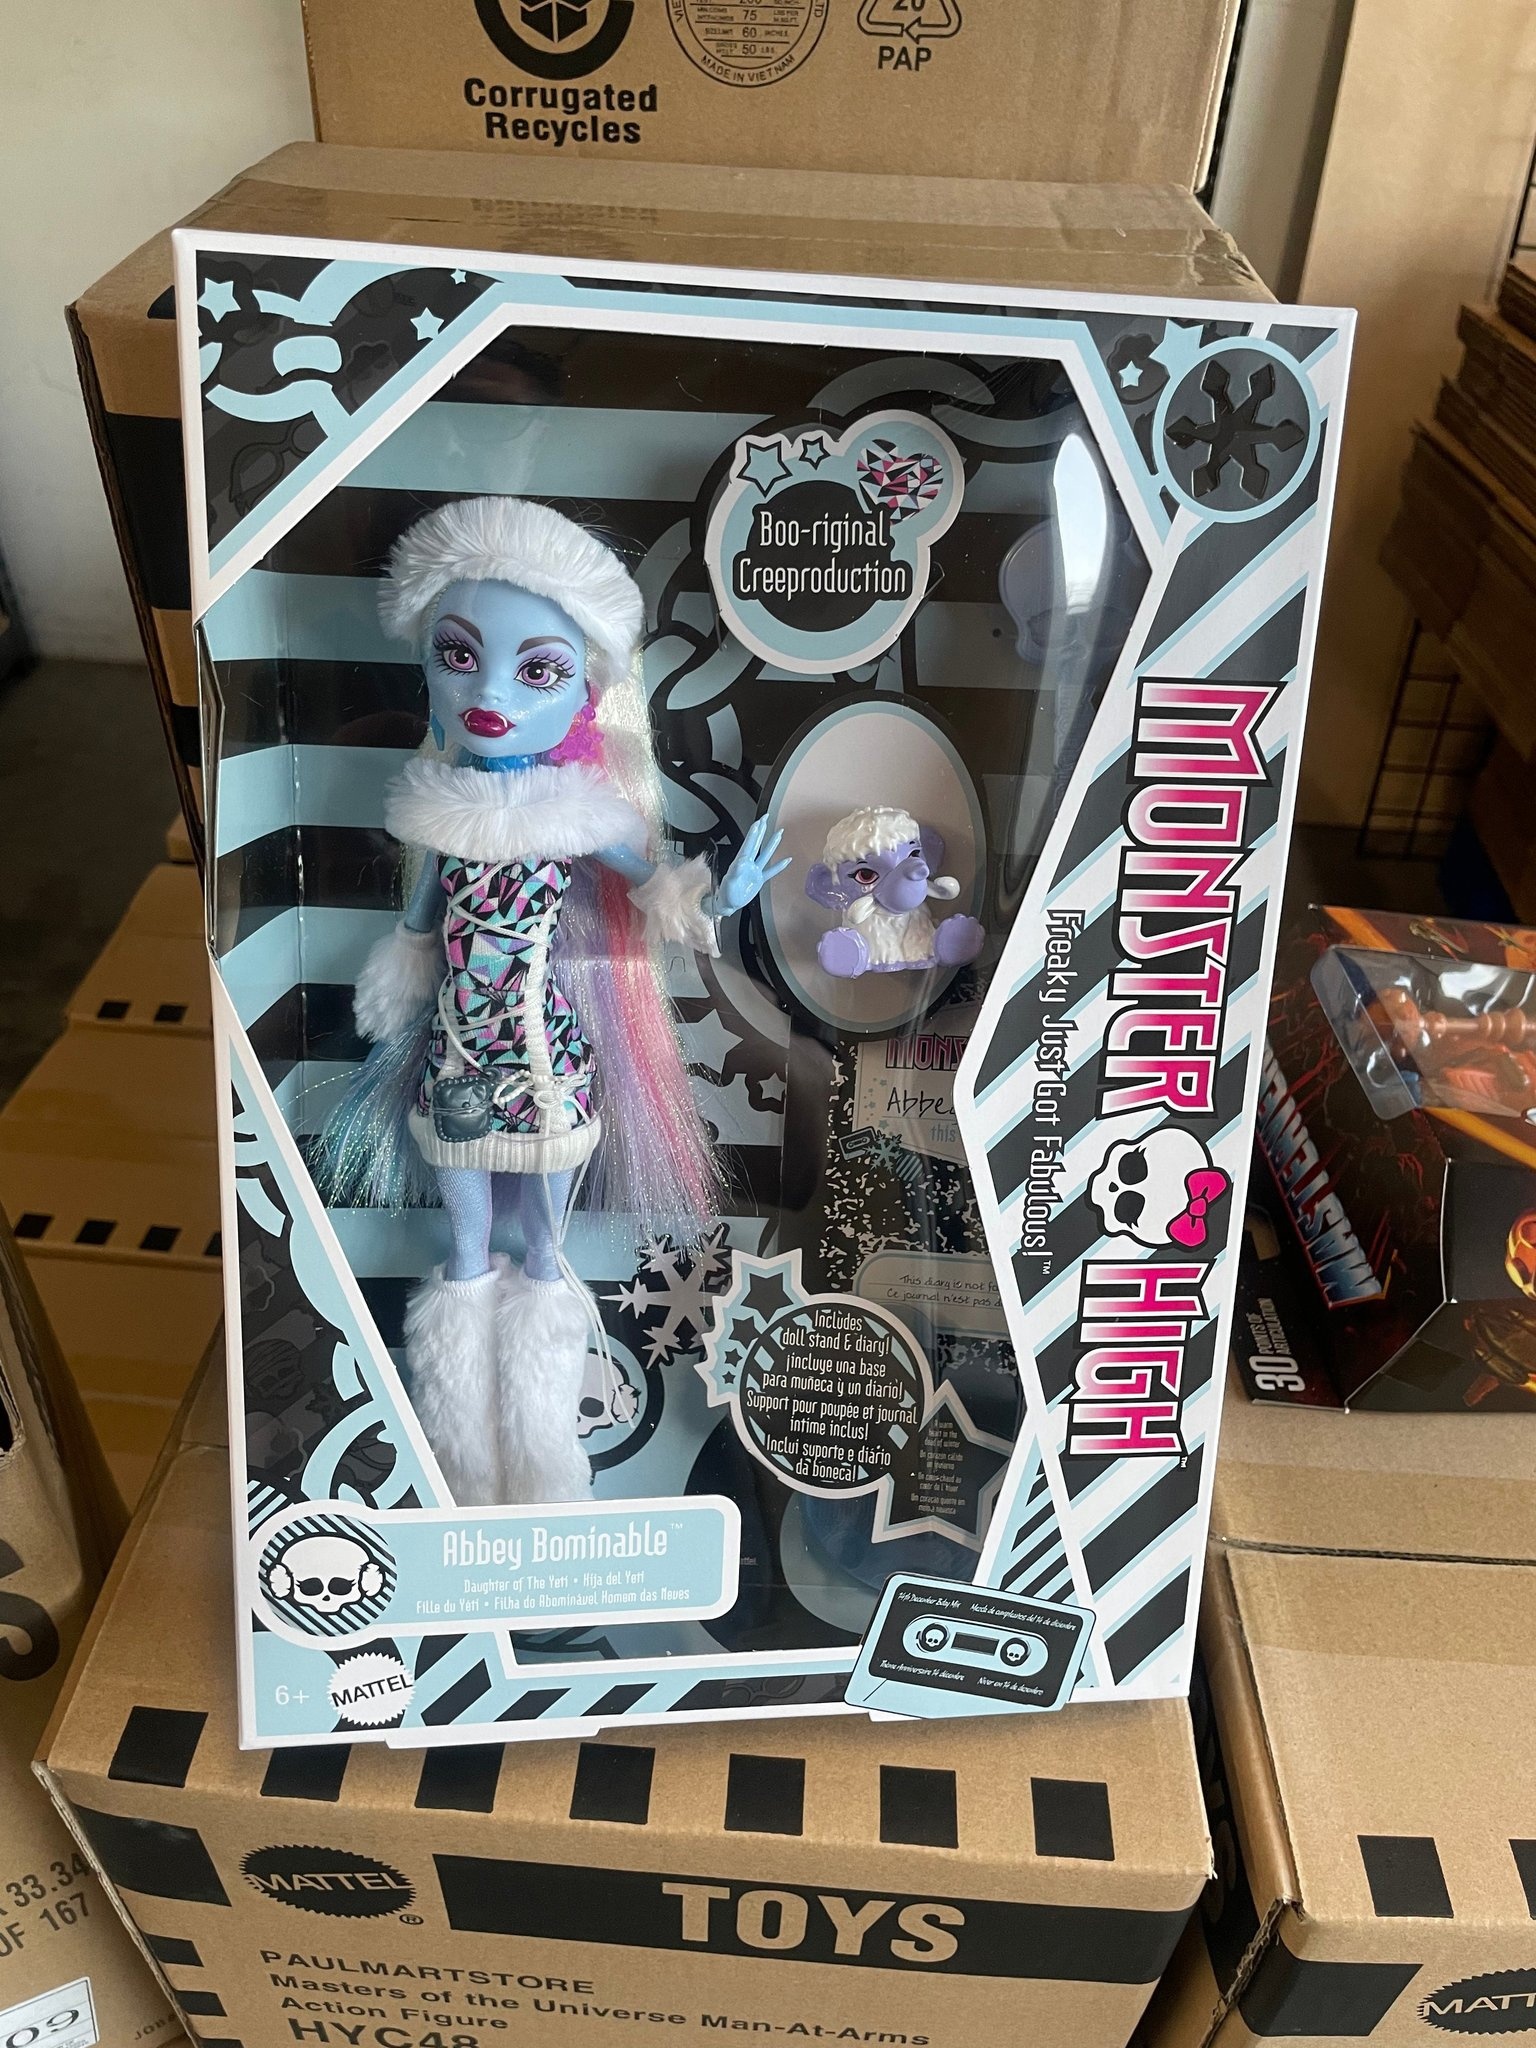 Monster High Creeproduction Ghoulia Yelps doll - reproduction of the first  Ghoulia 